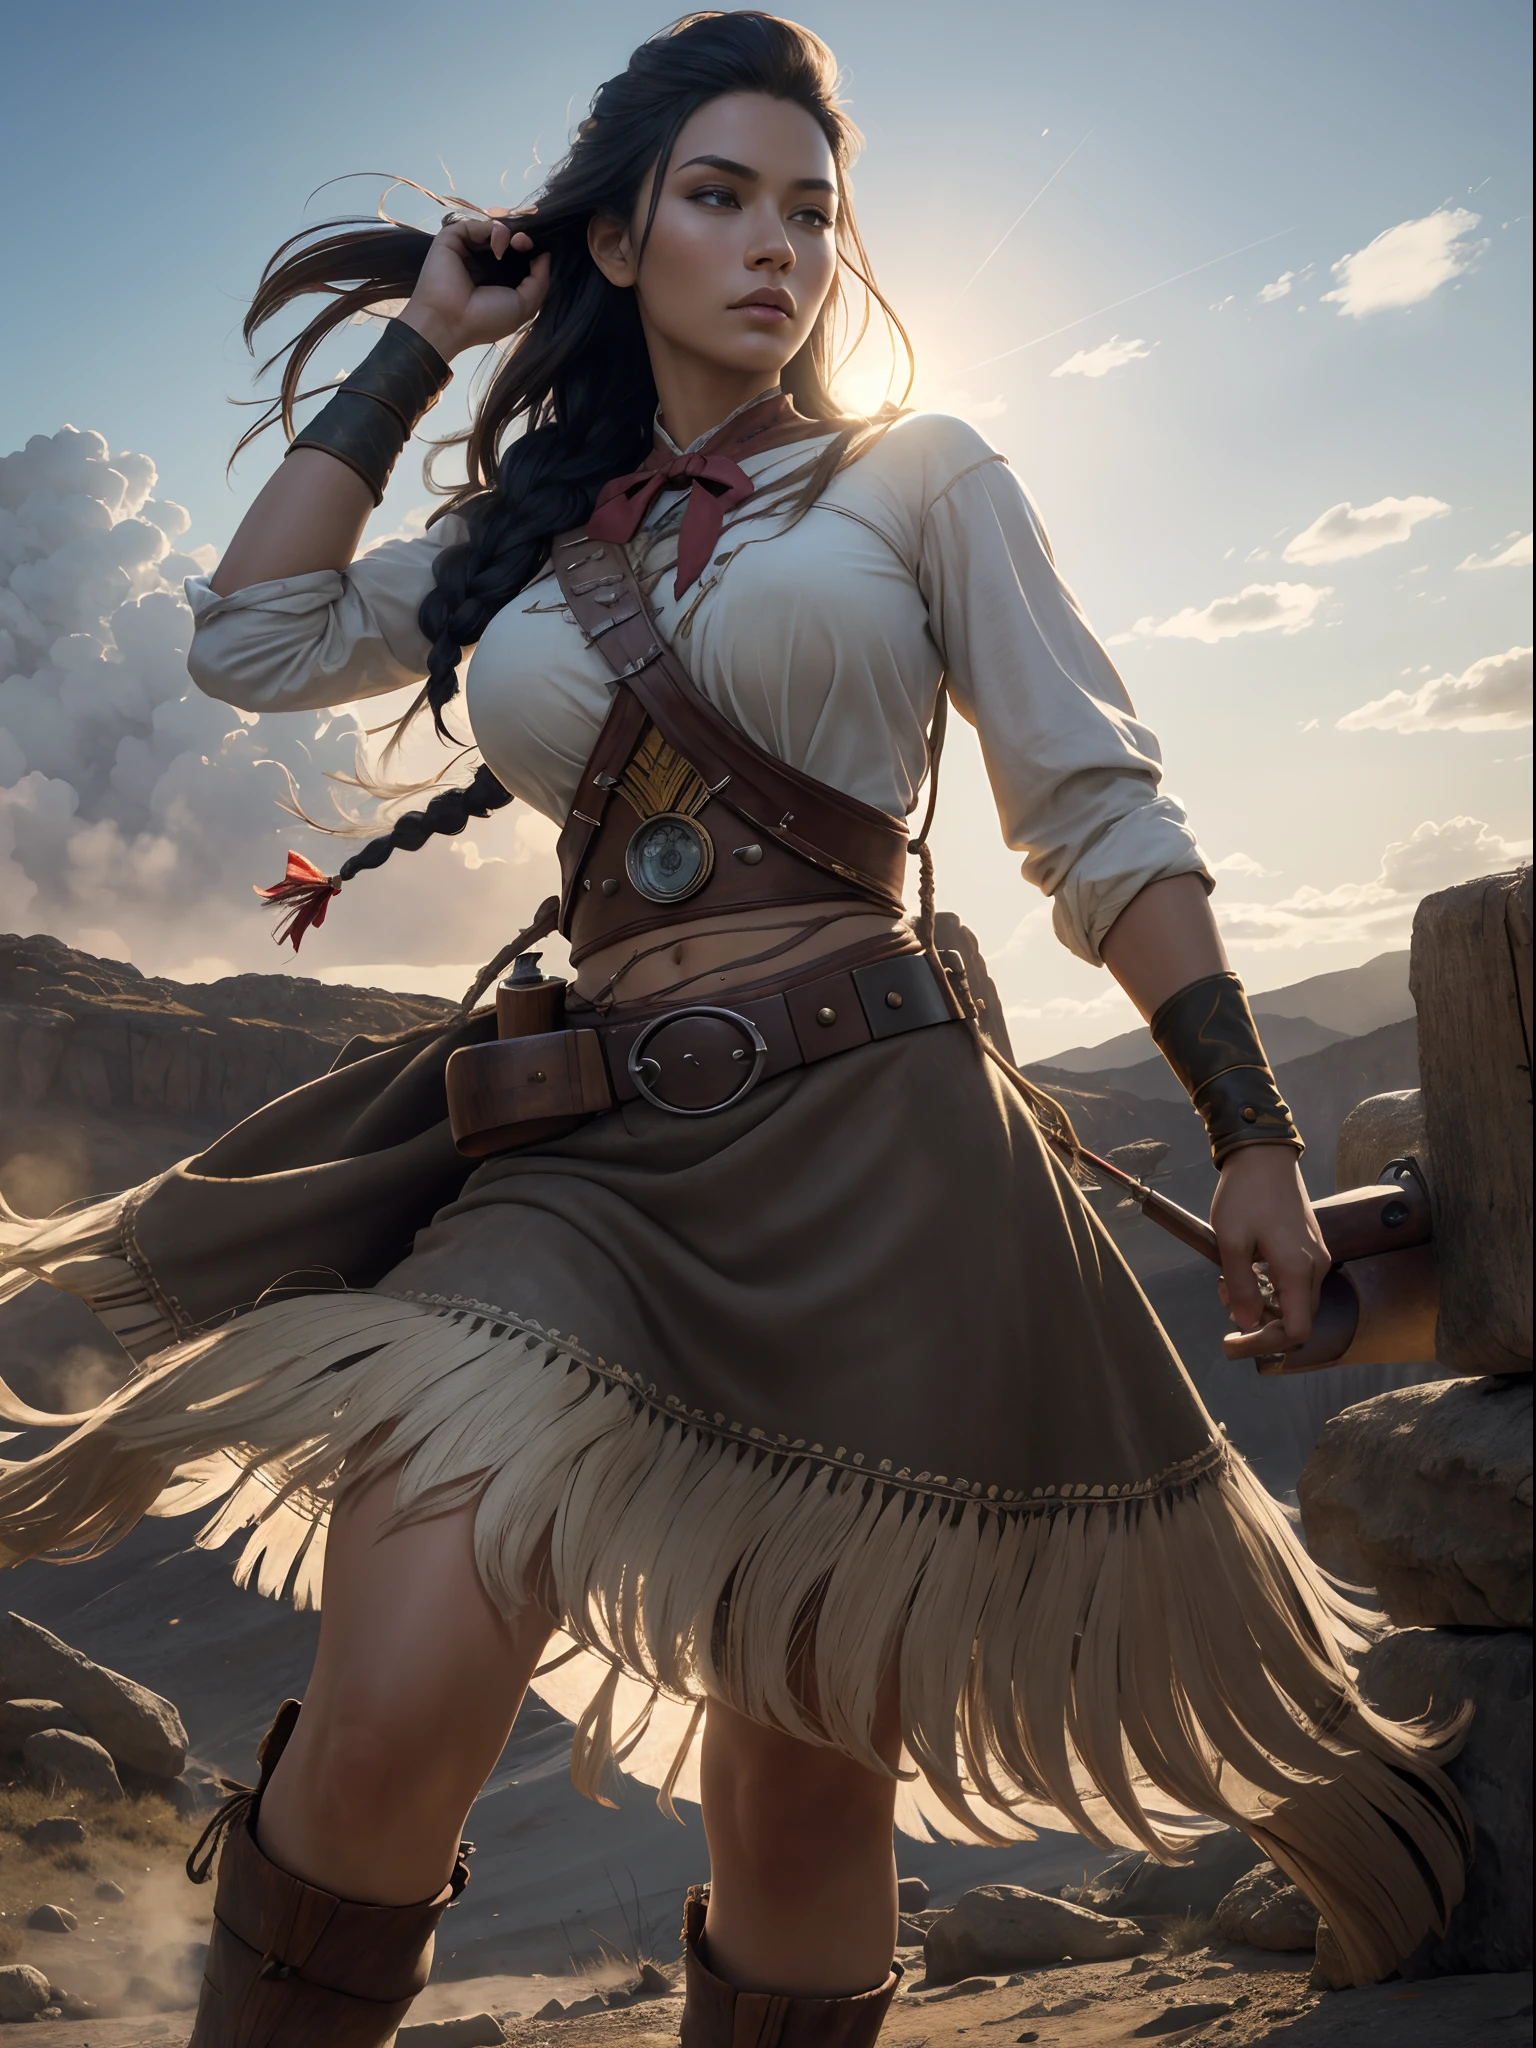 ((masutepiece)),  ((Best Quality)),  ((hight resolution)),  Extremely detailed)),  One girl as a costume for Pocahontas, Full body, infp young woman, Big Breast, (Super realistic), (matchless beauty), Detailed skin texture, Detailed Cloth Texture, beautifull detailed face, Intricate details, ultra-detailliert, Indigenous Feather Jewelry, Traditional handmade dresses, Armed Female Hunter Warrior, Dynamic Pose, ((Draw a bow)),  (((Wild west))) environment, Wasteland,  A hyper-realistic, Concept art, Elegant, ((Convoluted)), ((Highly detailed)), depth of fields, ((professionally color graded)), soft ambient lighting, Dusk, Best Quality, hight resolution, Photorealistic, primitive, 8K,masutepiece, Best Quality, Master Furnace 8K.nffsw. Hi-Lib:1.2, film grains, Blur blur:1.2, Lens Flare, (vivd colour:1.2), (Delicate),